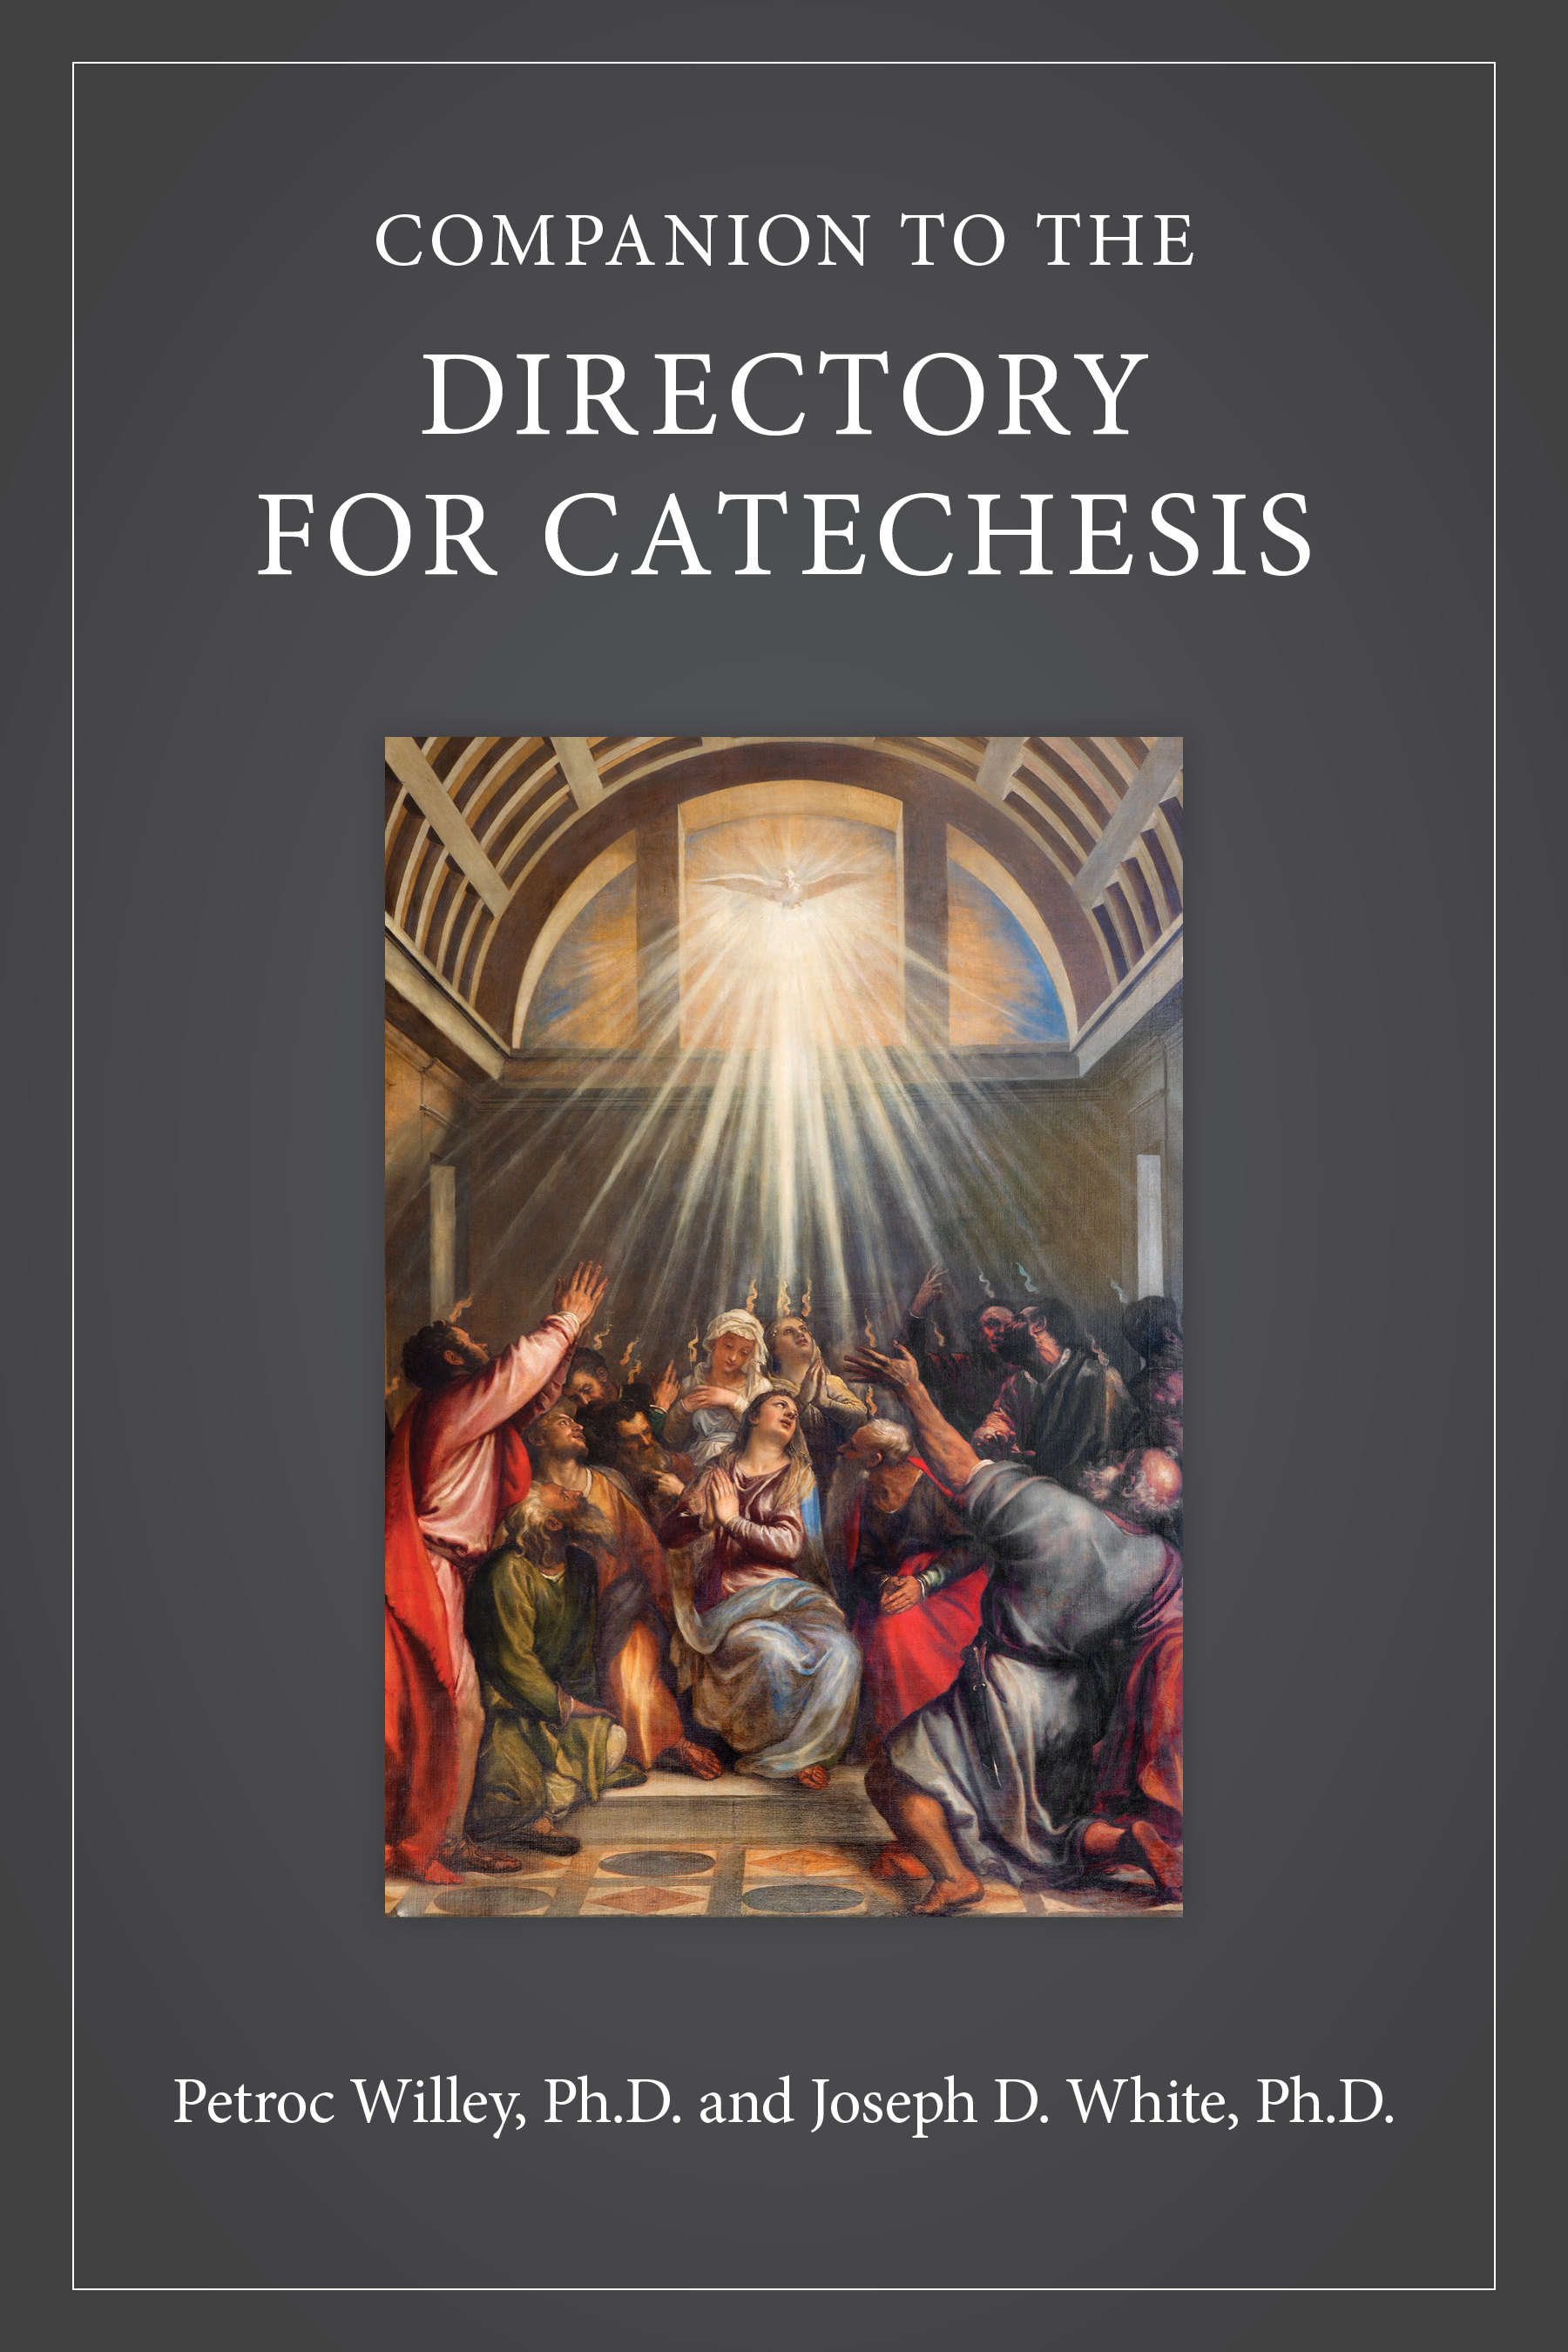 Companion to the Directory for Catechesis / Petrock Willey and Joseph D White